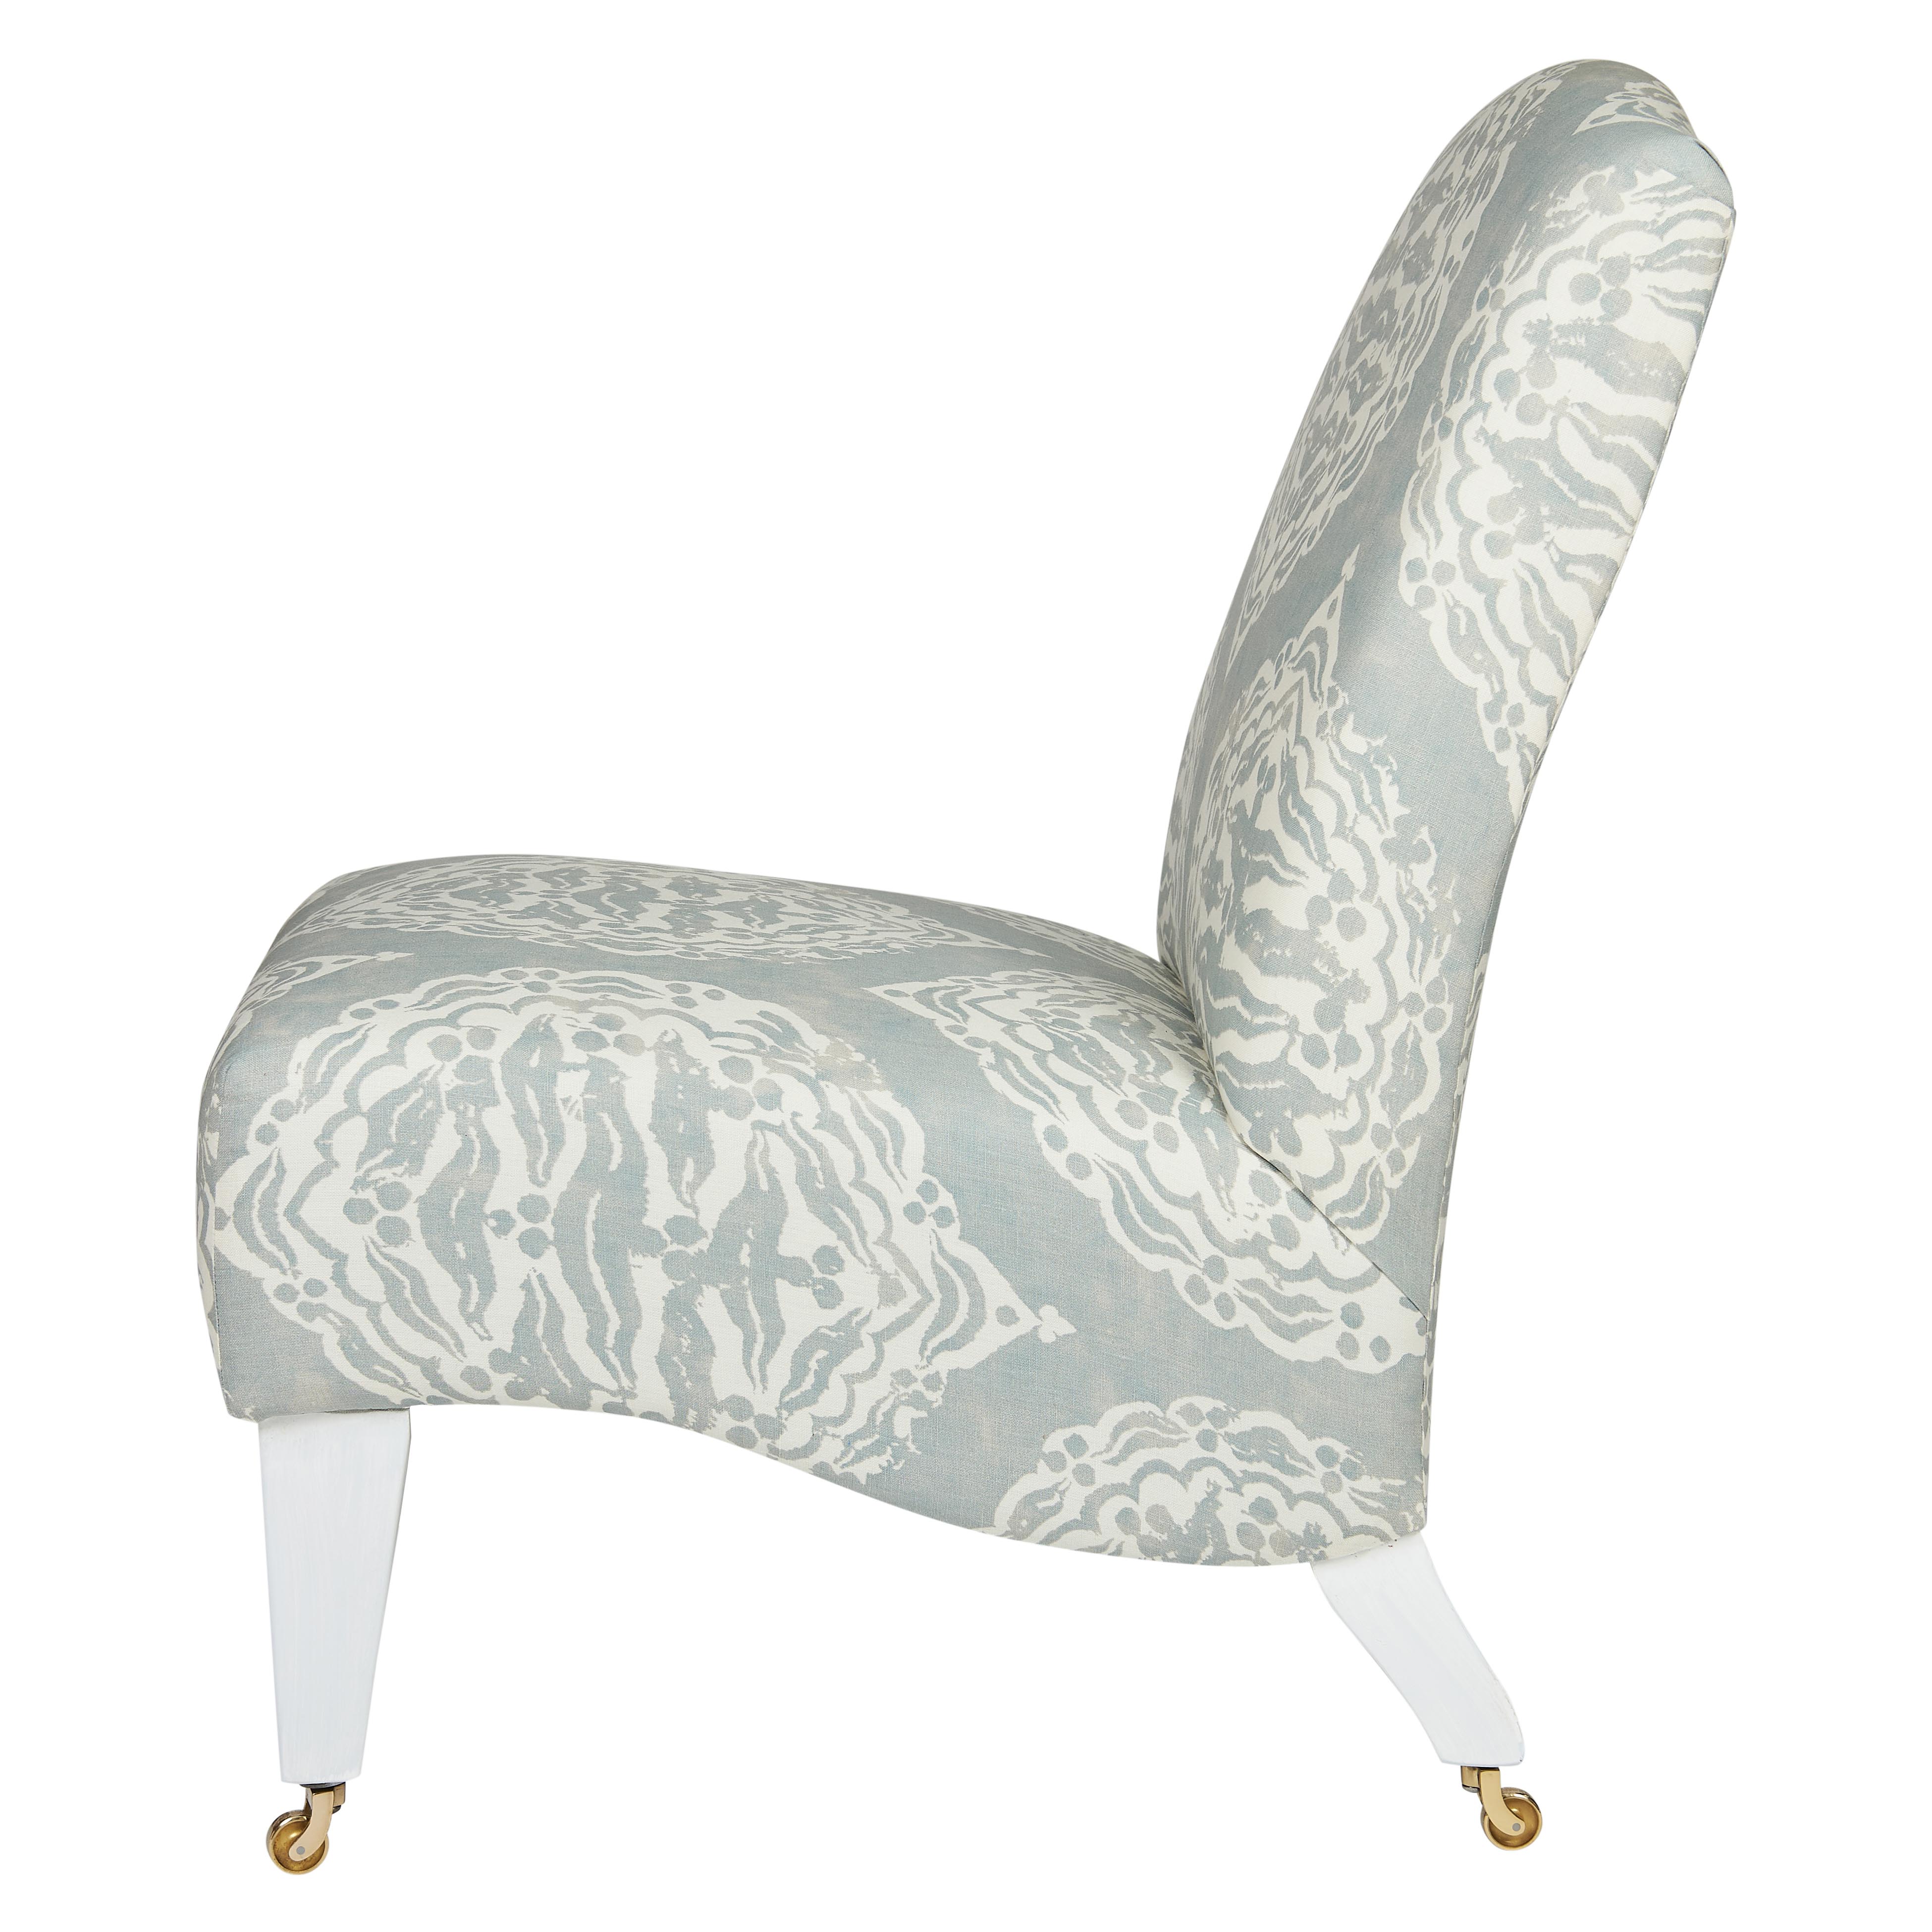 Slipper Chair in Mander Duck Egg with Off-White Exposed Legs